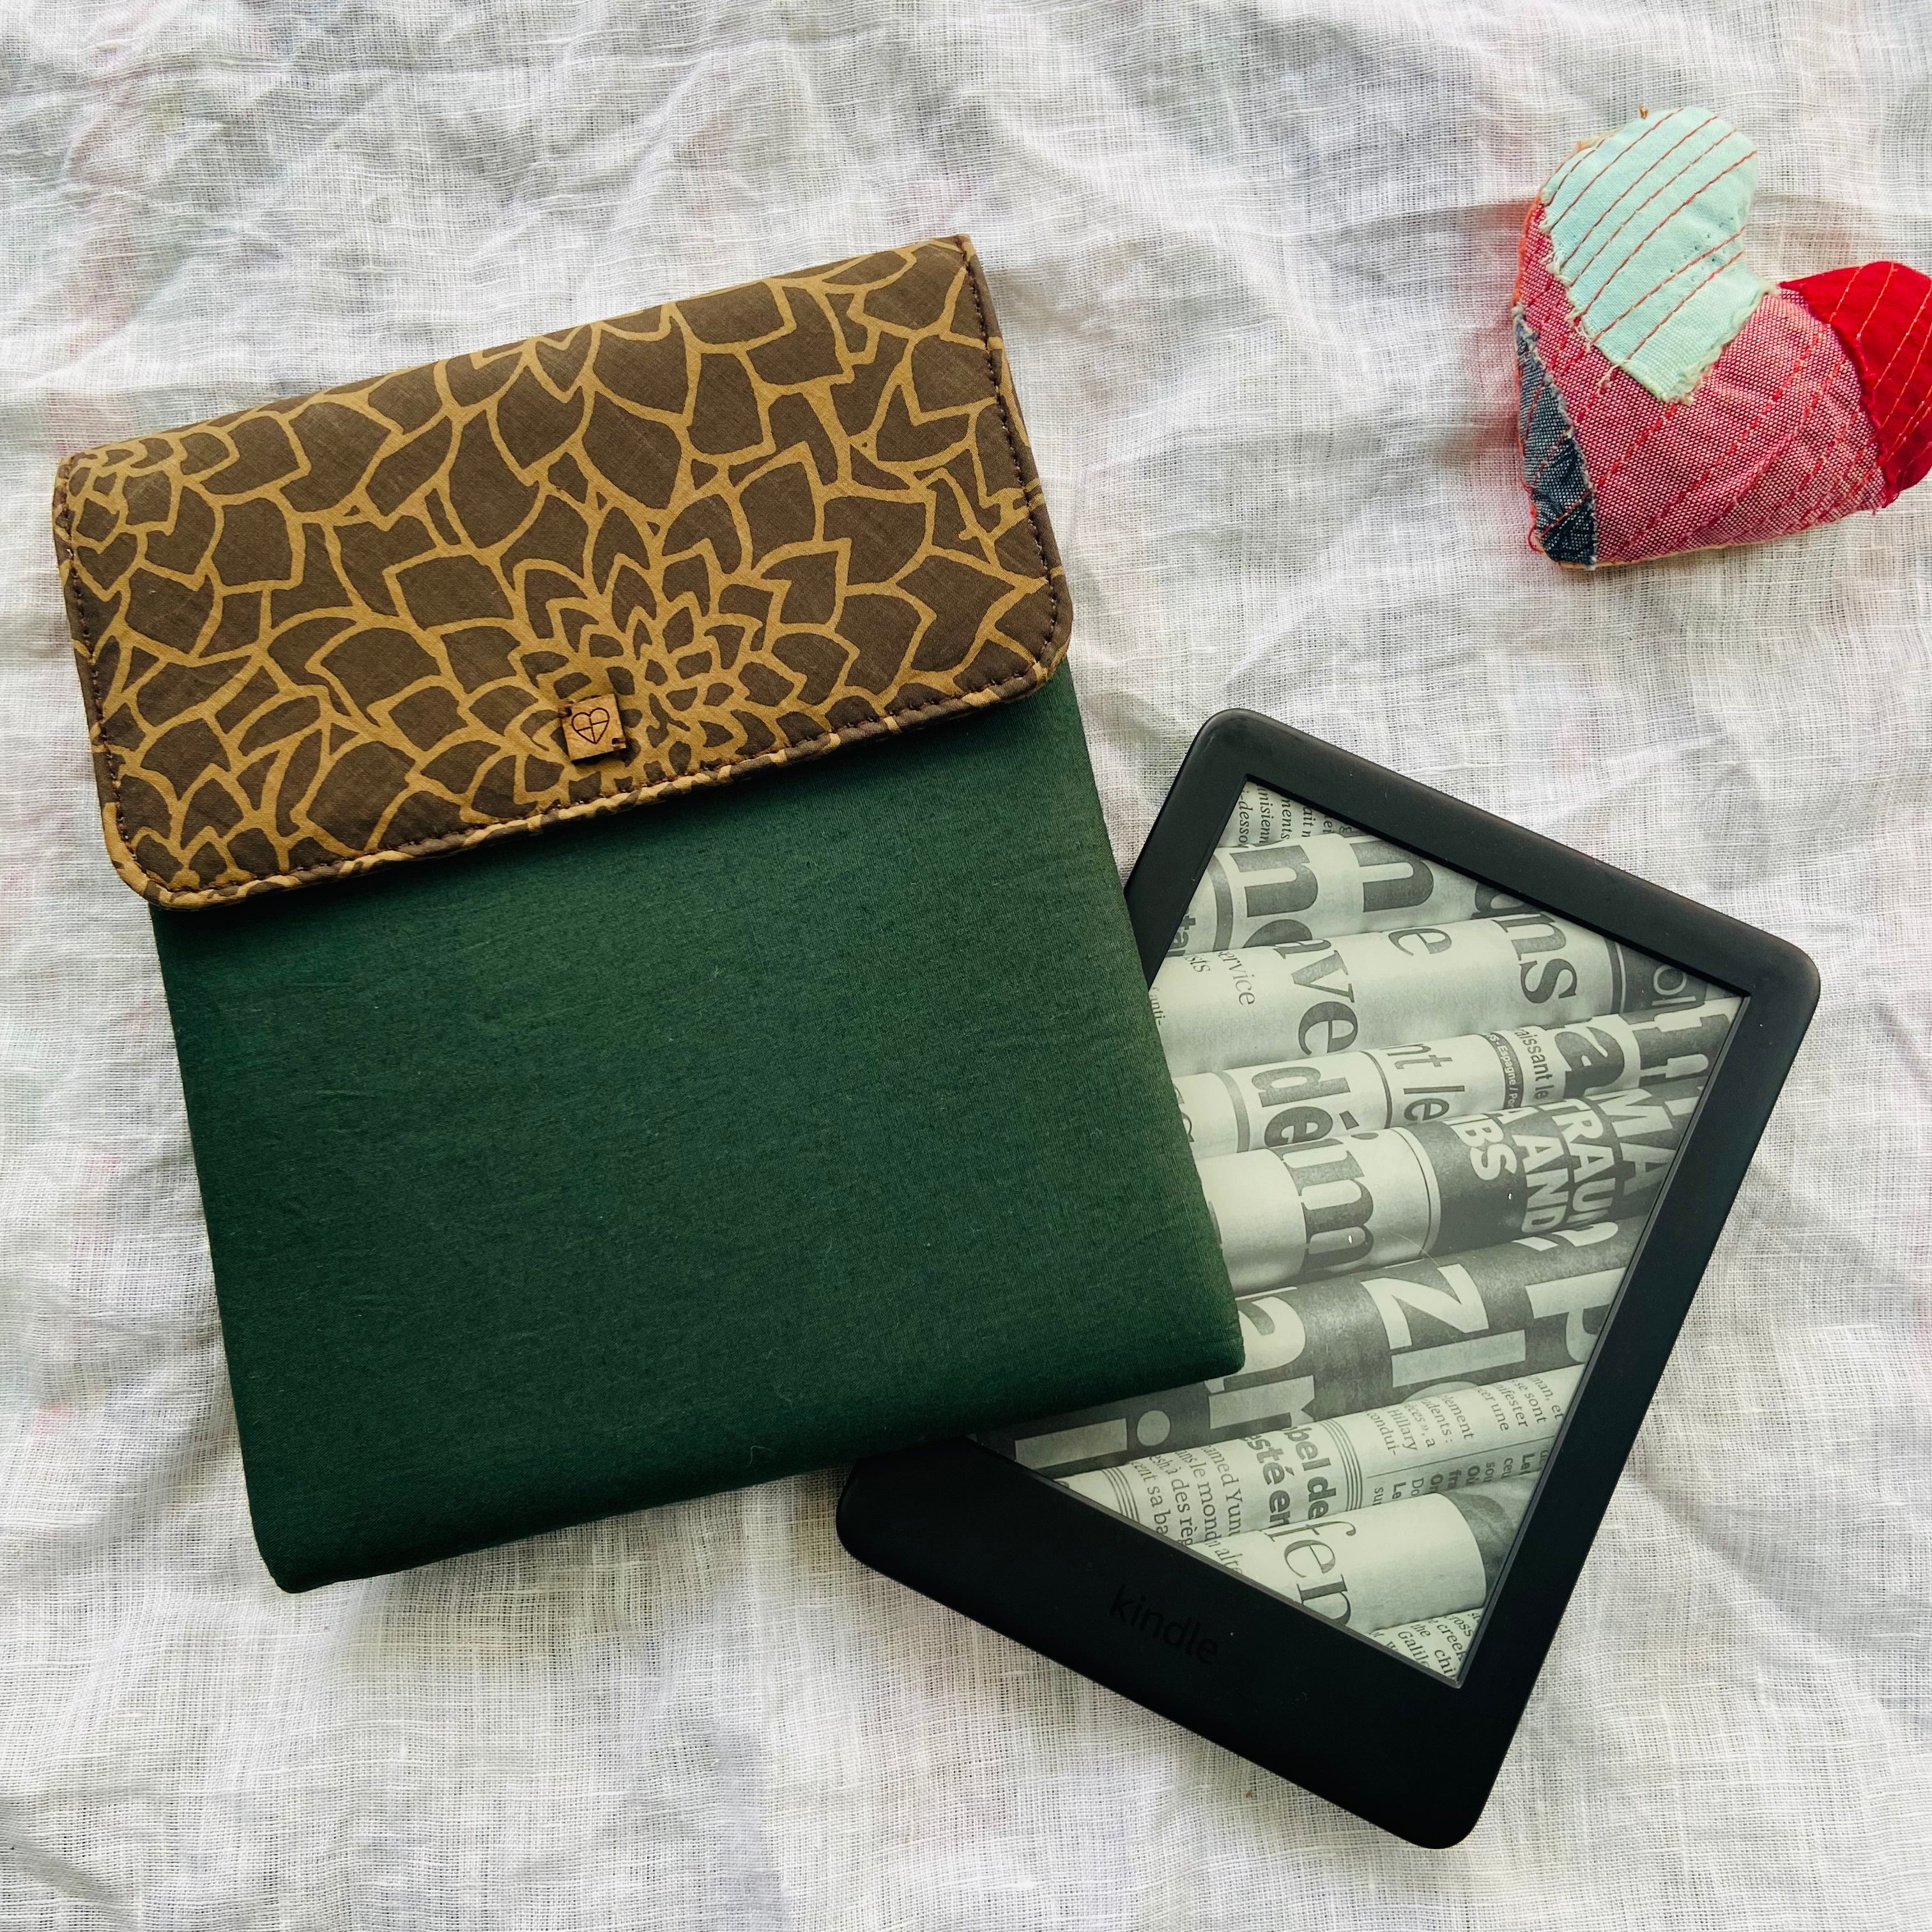 Shop Handmade Kindle Cases & Sleeves Online At Best Prices - Upcyclie